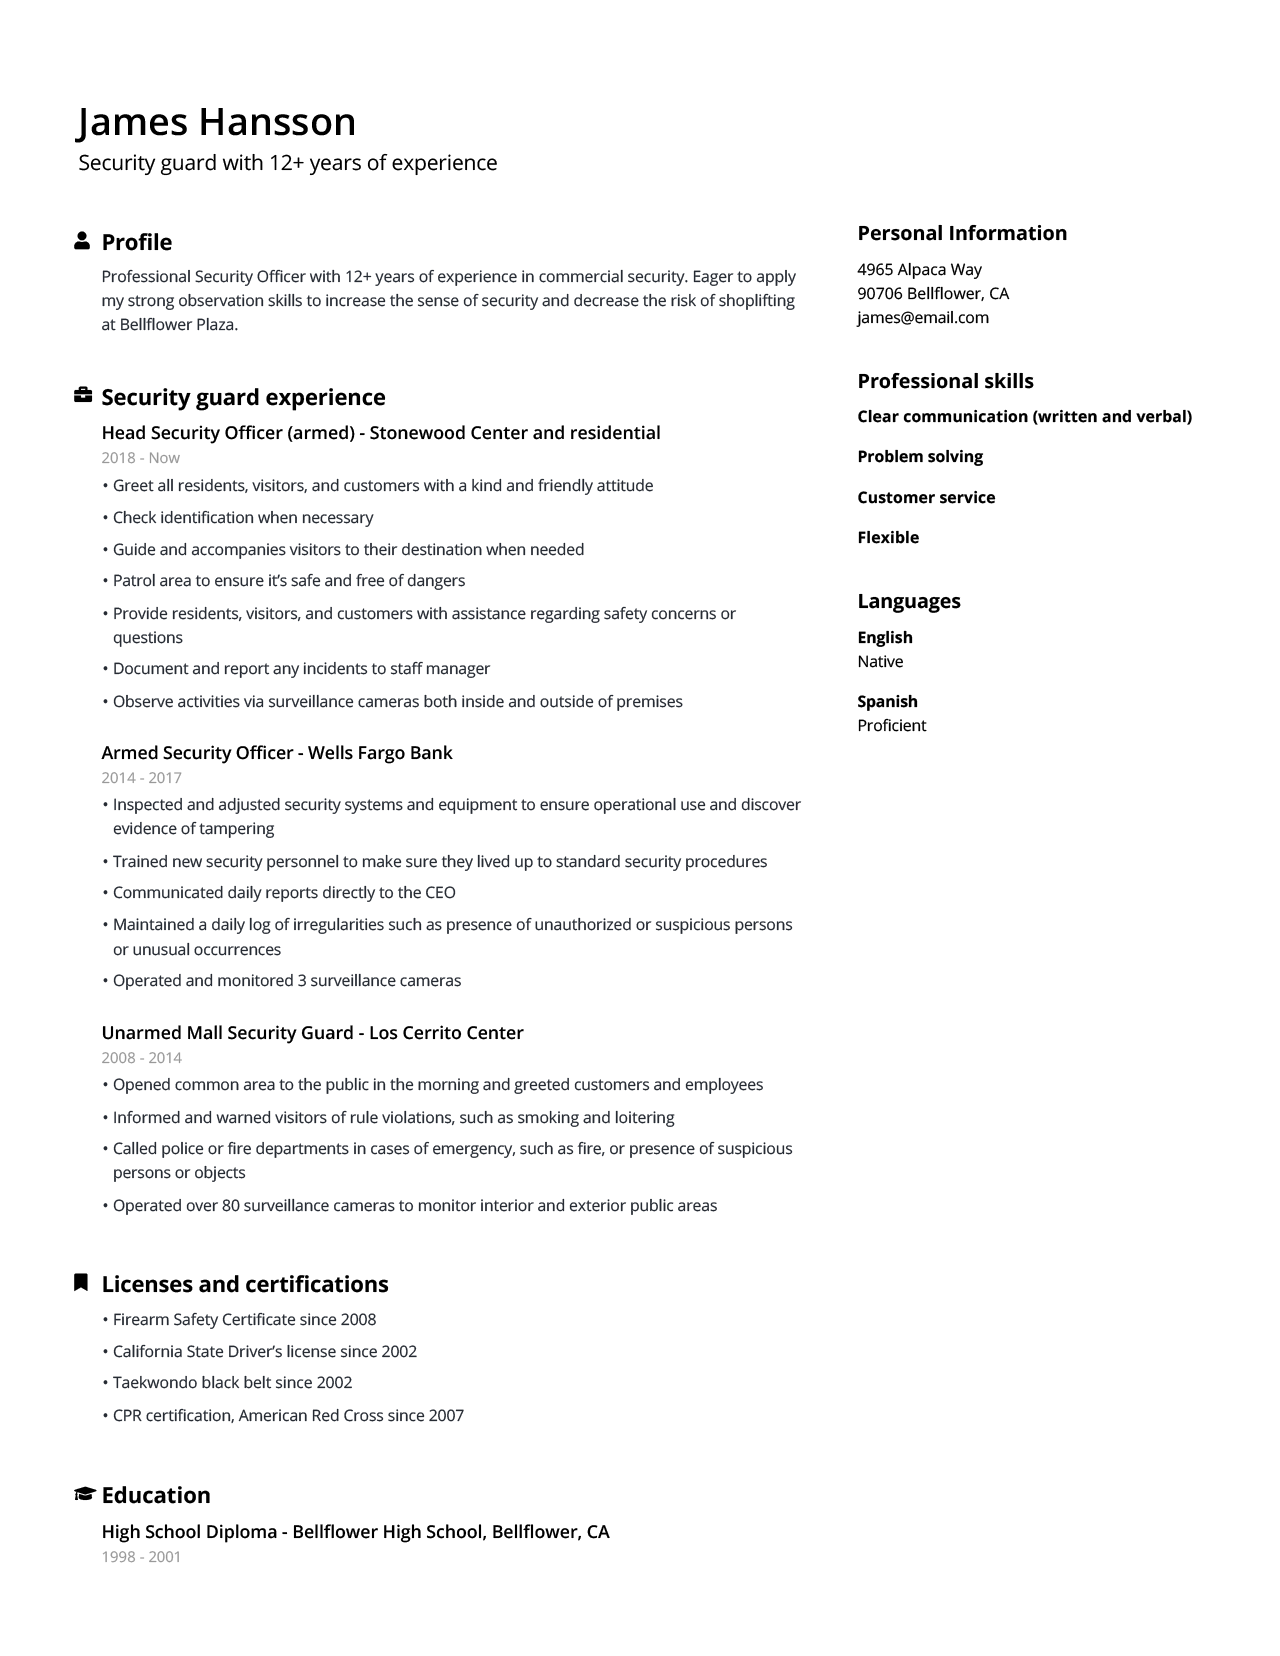 resume format for security guard